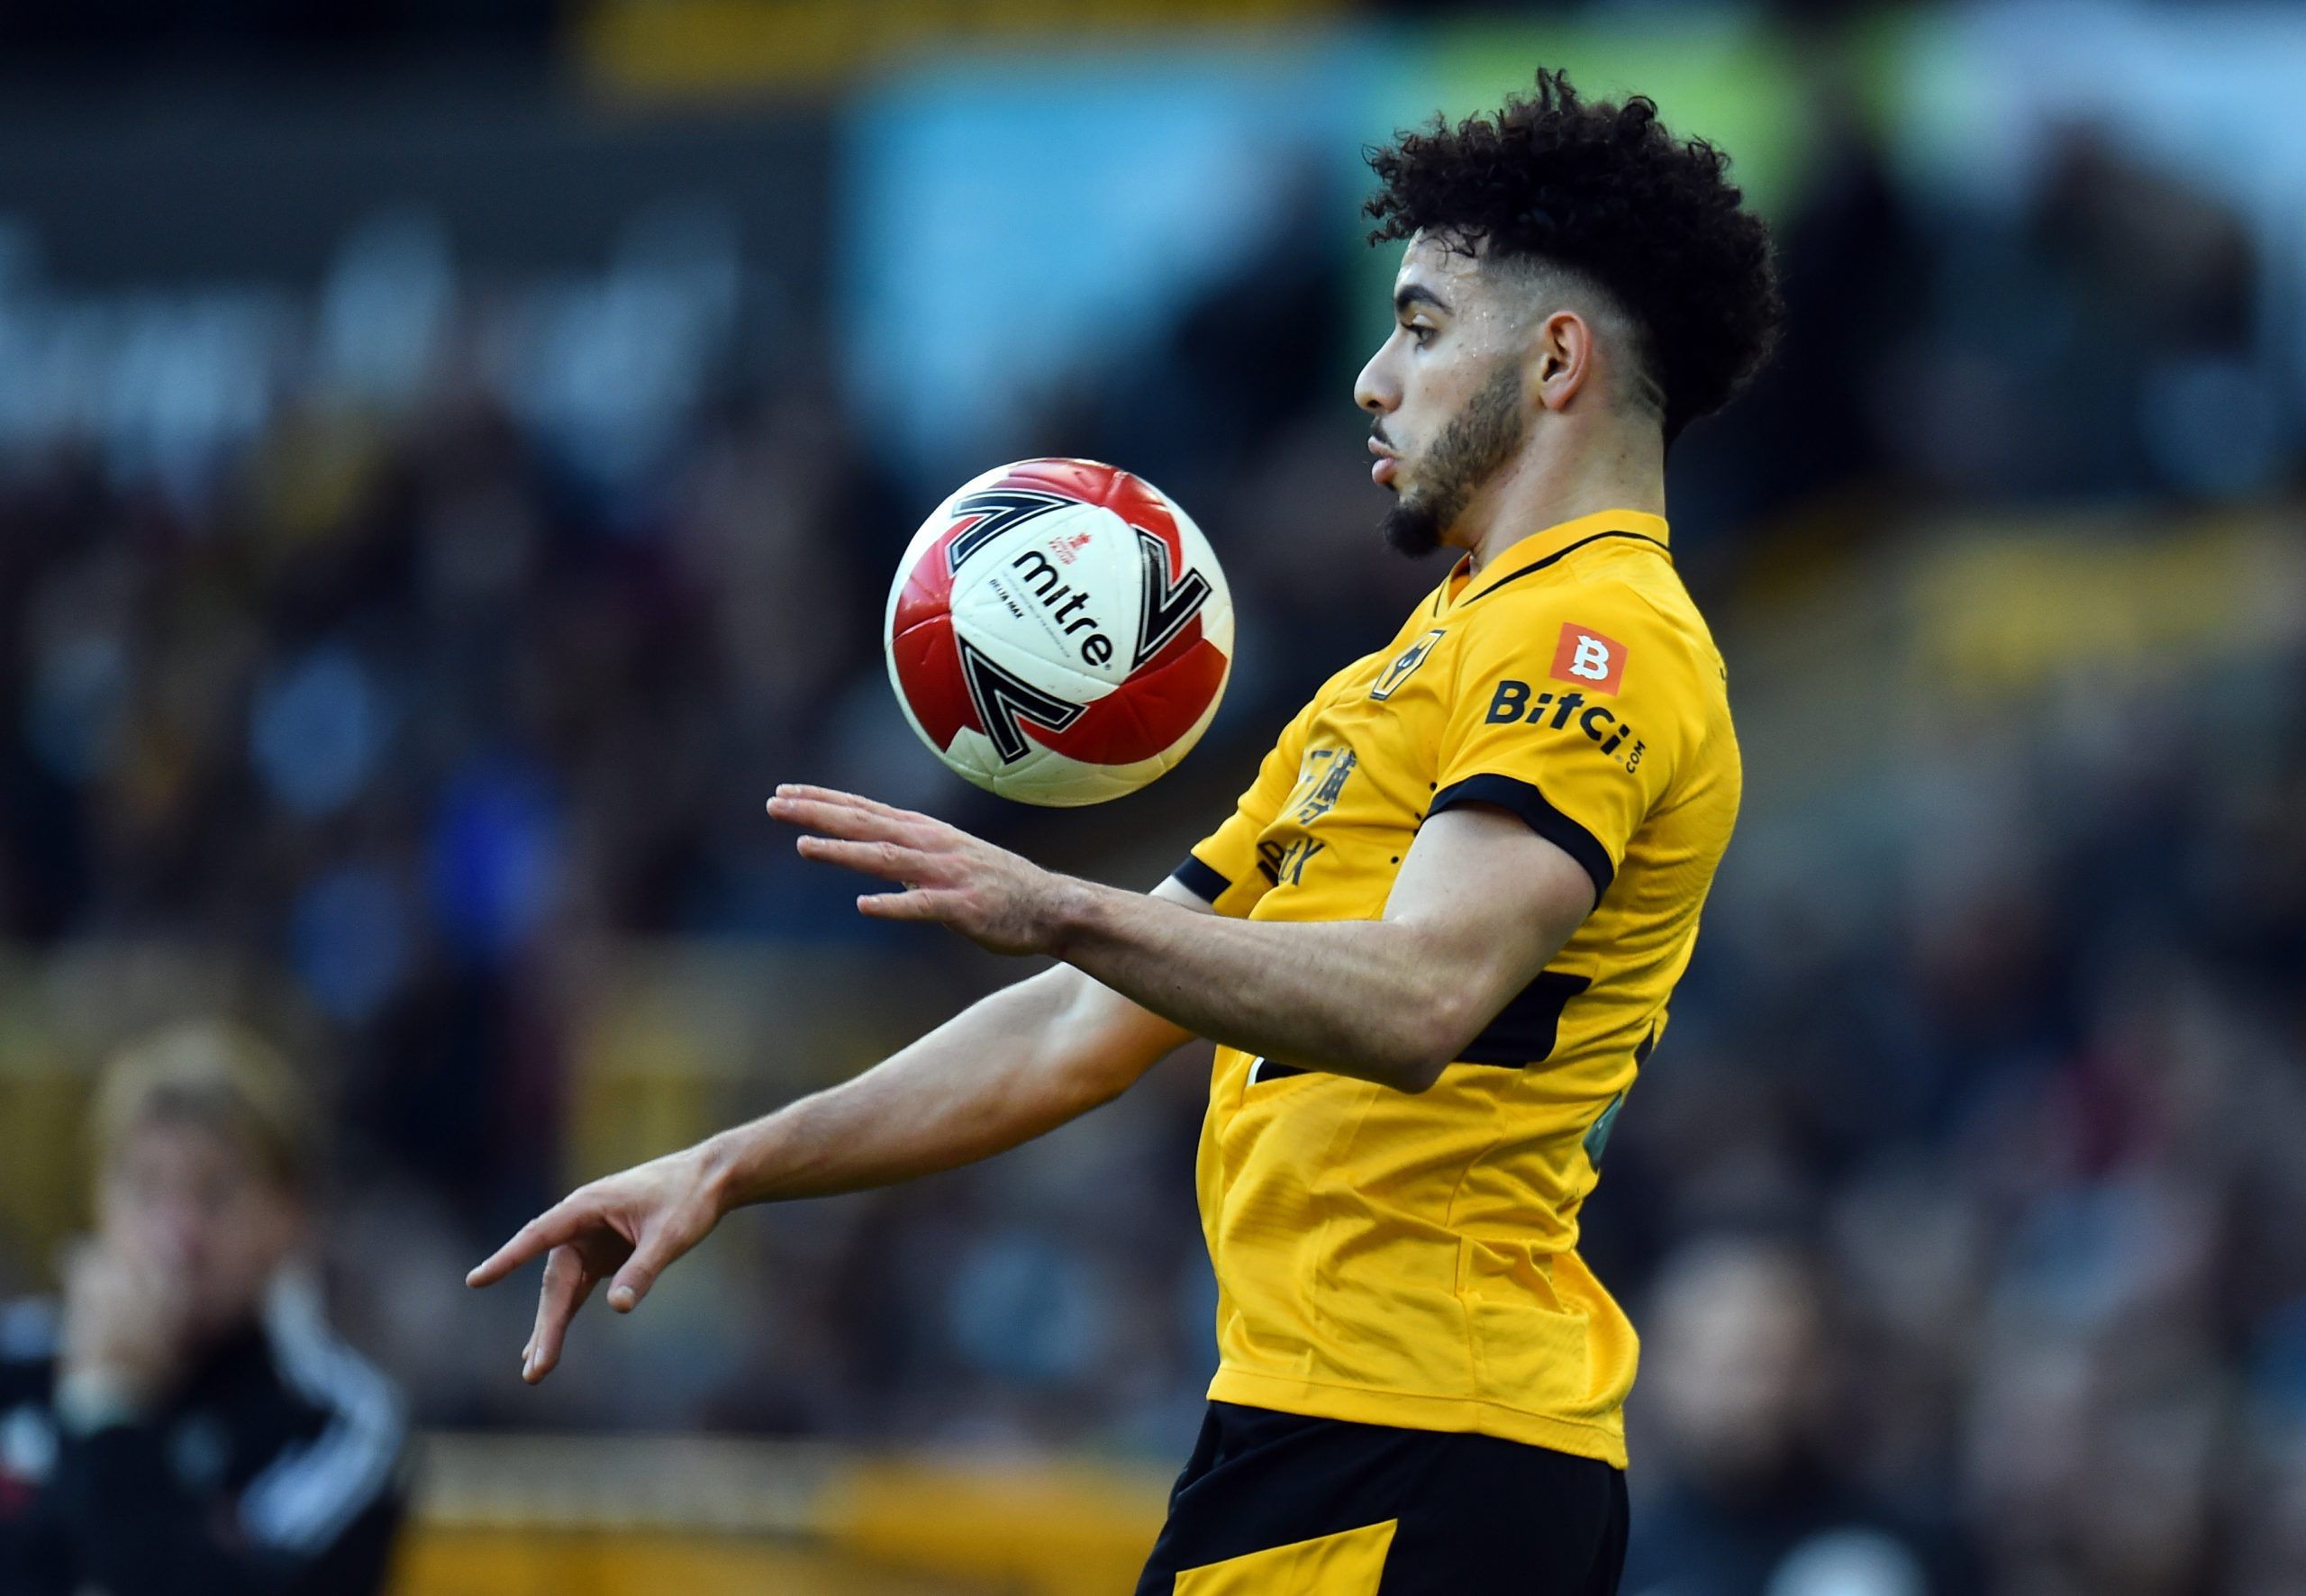 Bruno Lage, Fosun, Jeff Shi, Molineux, The Old Gold, Wolves, Wolves fans, Wolves info, Wolves latest, Wolves news, Wolves updates, WWFC, WWFC news, WWFC update, Premier League, Premier League news, Wolverhampton Wanderers, Performance in numbers, Rayan Ait-Nouri, 
